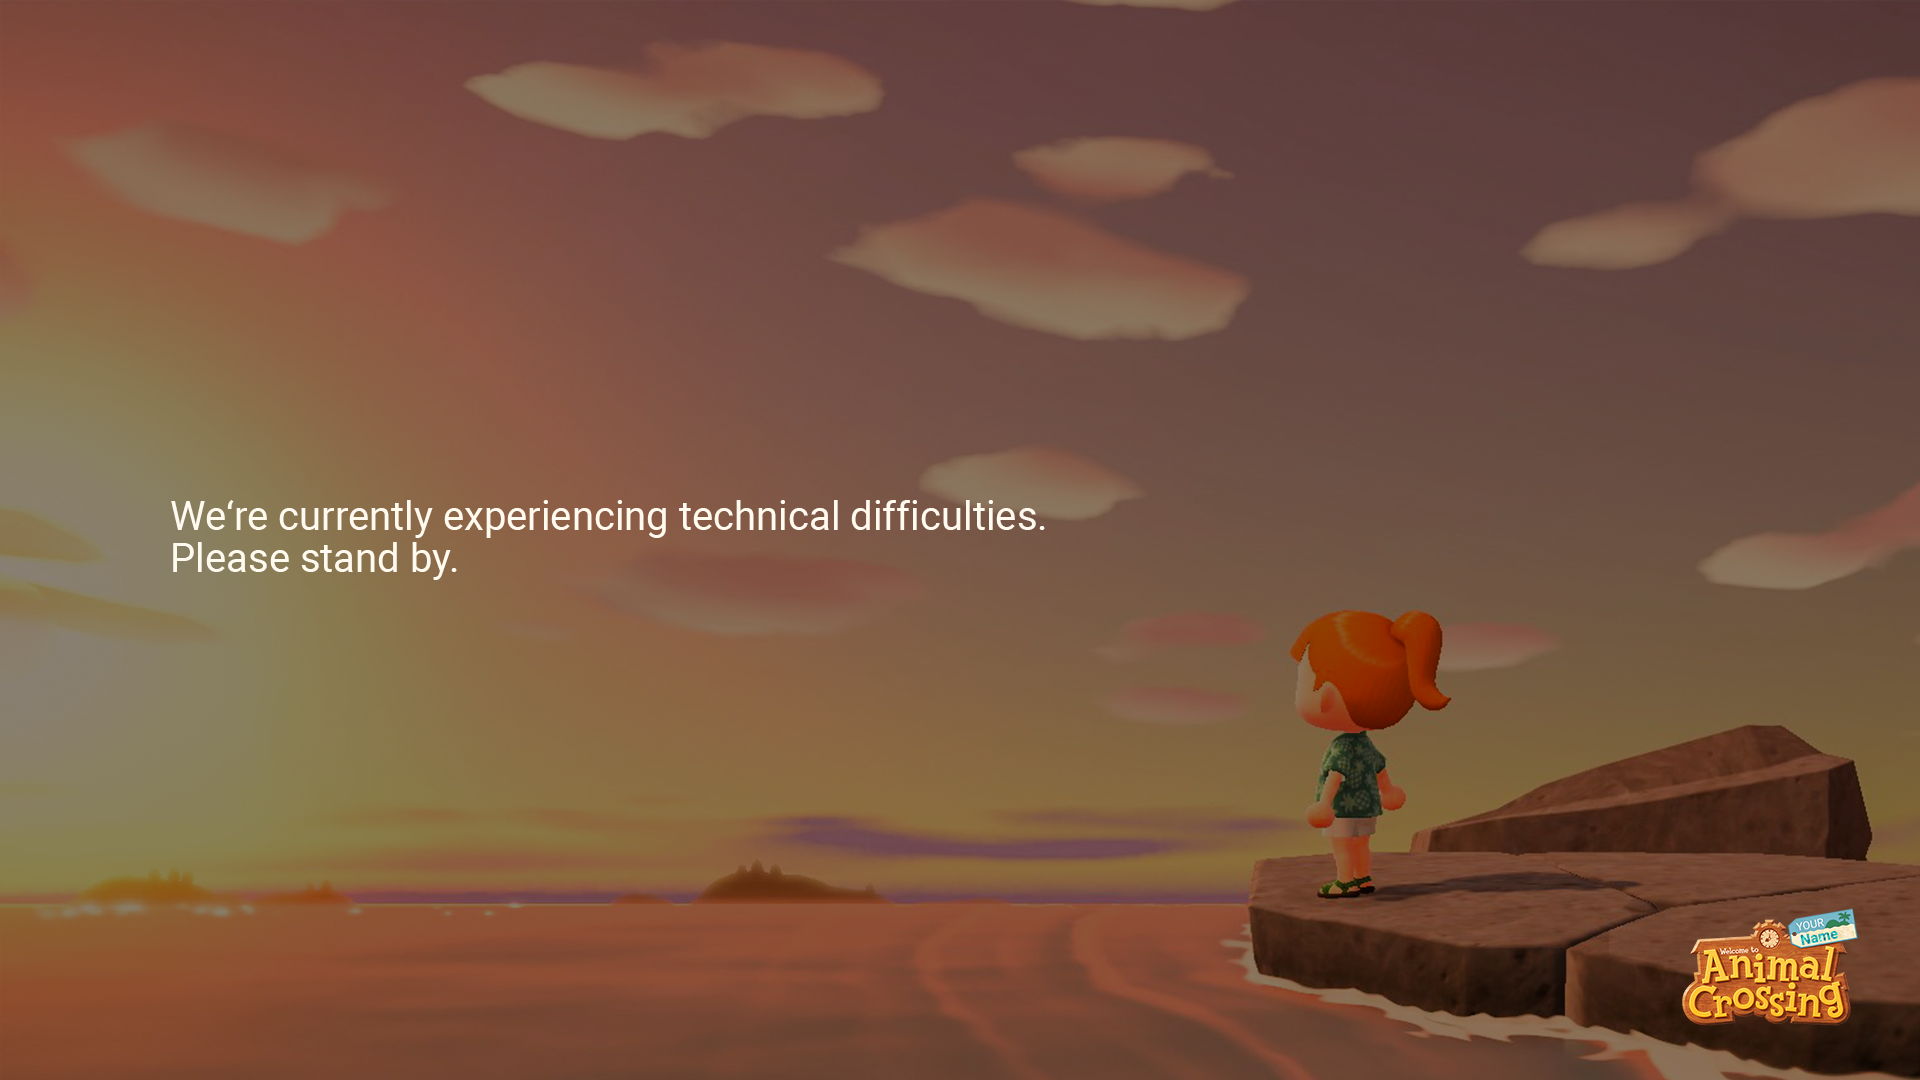 Animal Crossing Difficulties